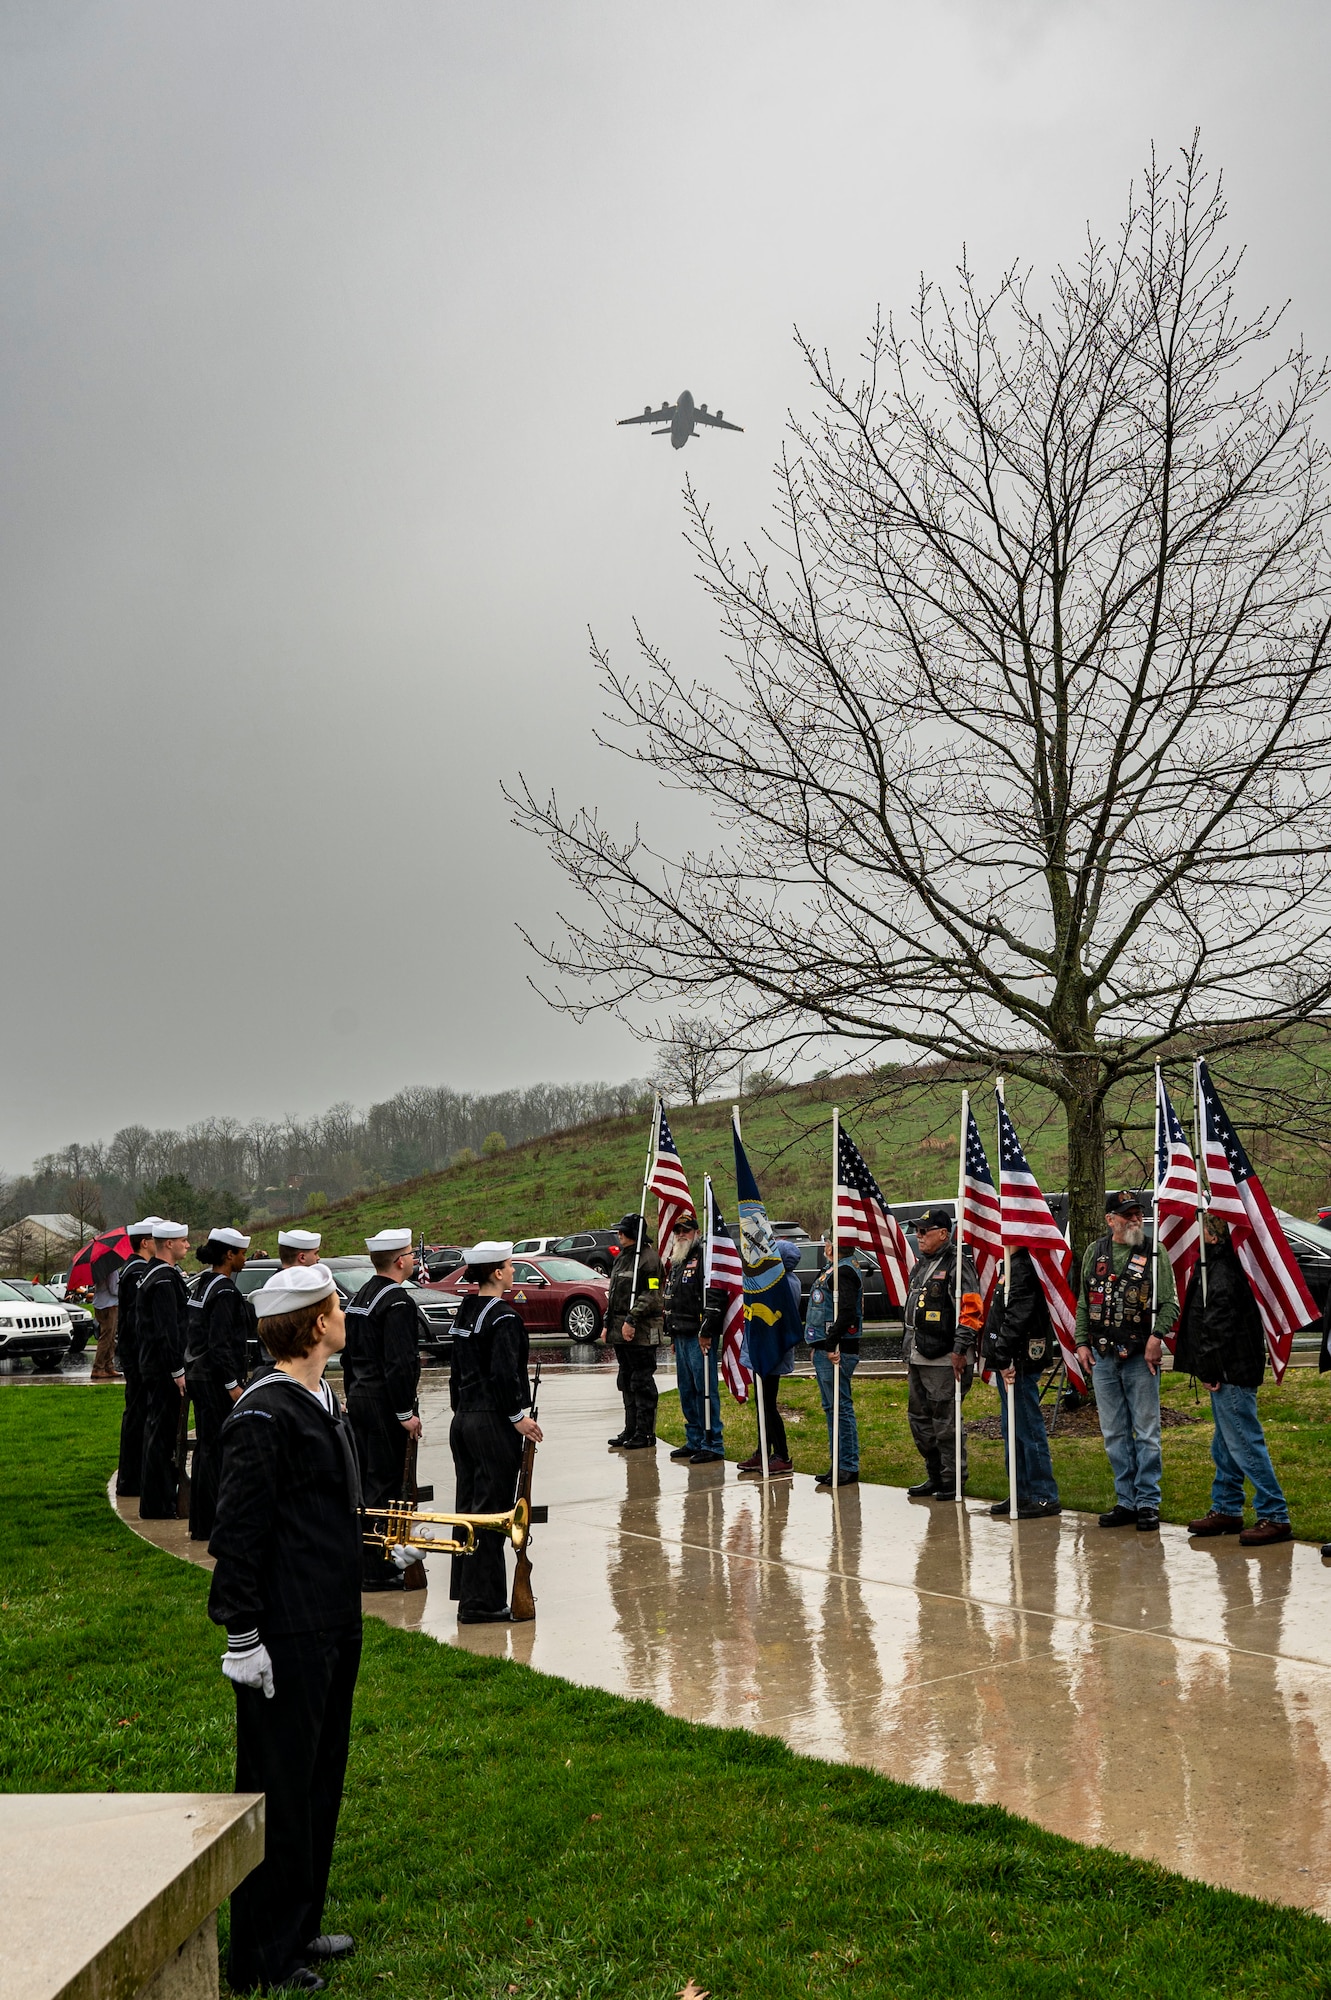 Sailors stand at attention and veterans stand with U.S. flags as a C-17 flies overhead